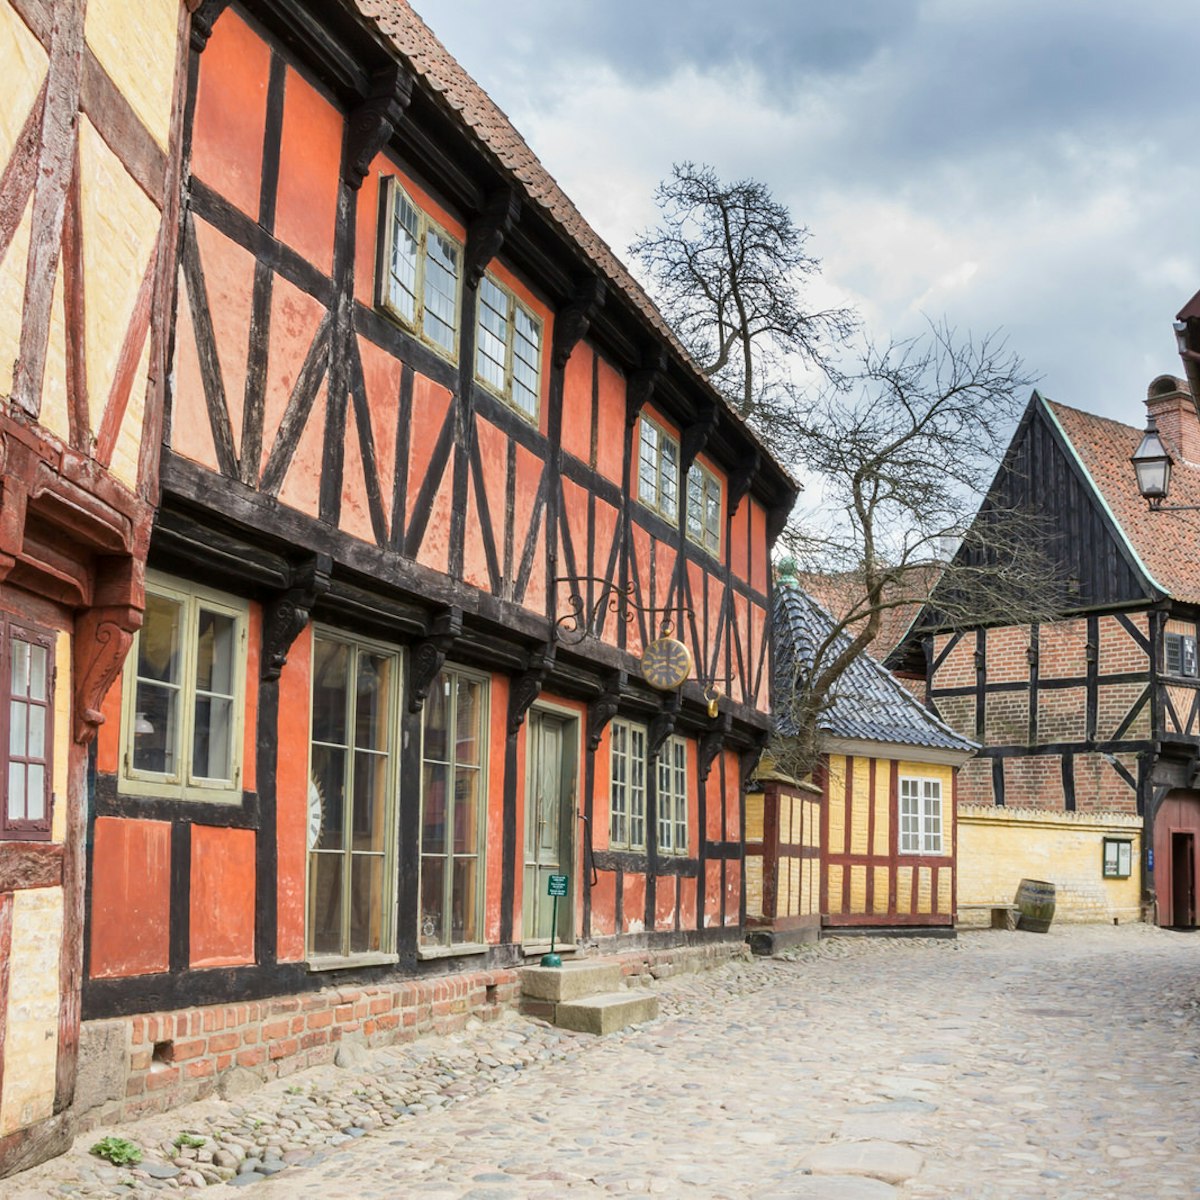 AARHUS, DENMARK - APRIL 12, 2015: Medieval houses the streets of  the old town Den Gamle By in Aarhus Denmark; Shutterstock ID 271673486; Your name (First / Last): Emma Sparks; GL account no.: 65050; Netsuite department name: Online Editorial; Full Product or Project name including edition: Best in Europe POI updates